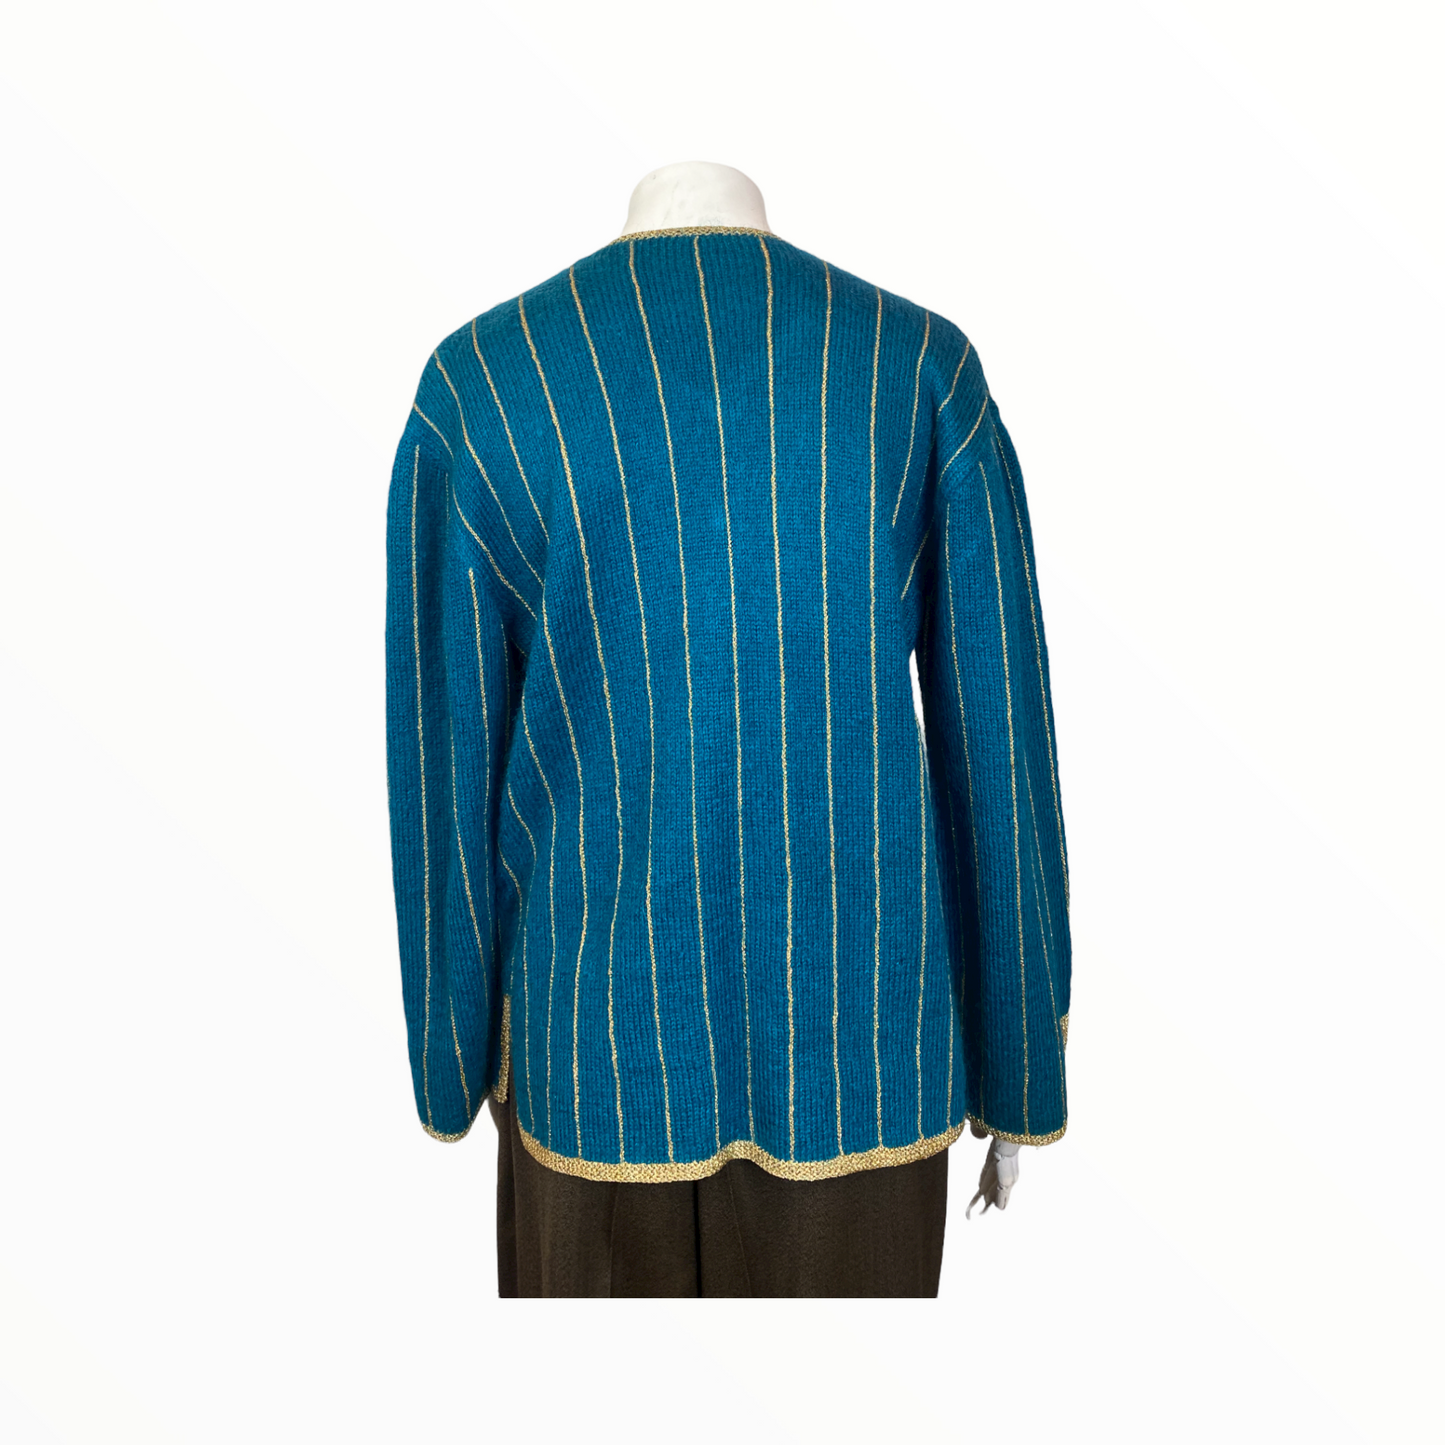 Vintage duck blue and gold sweater - M - 1990s